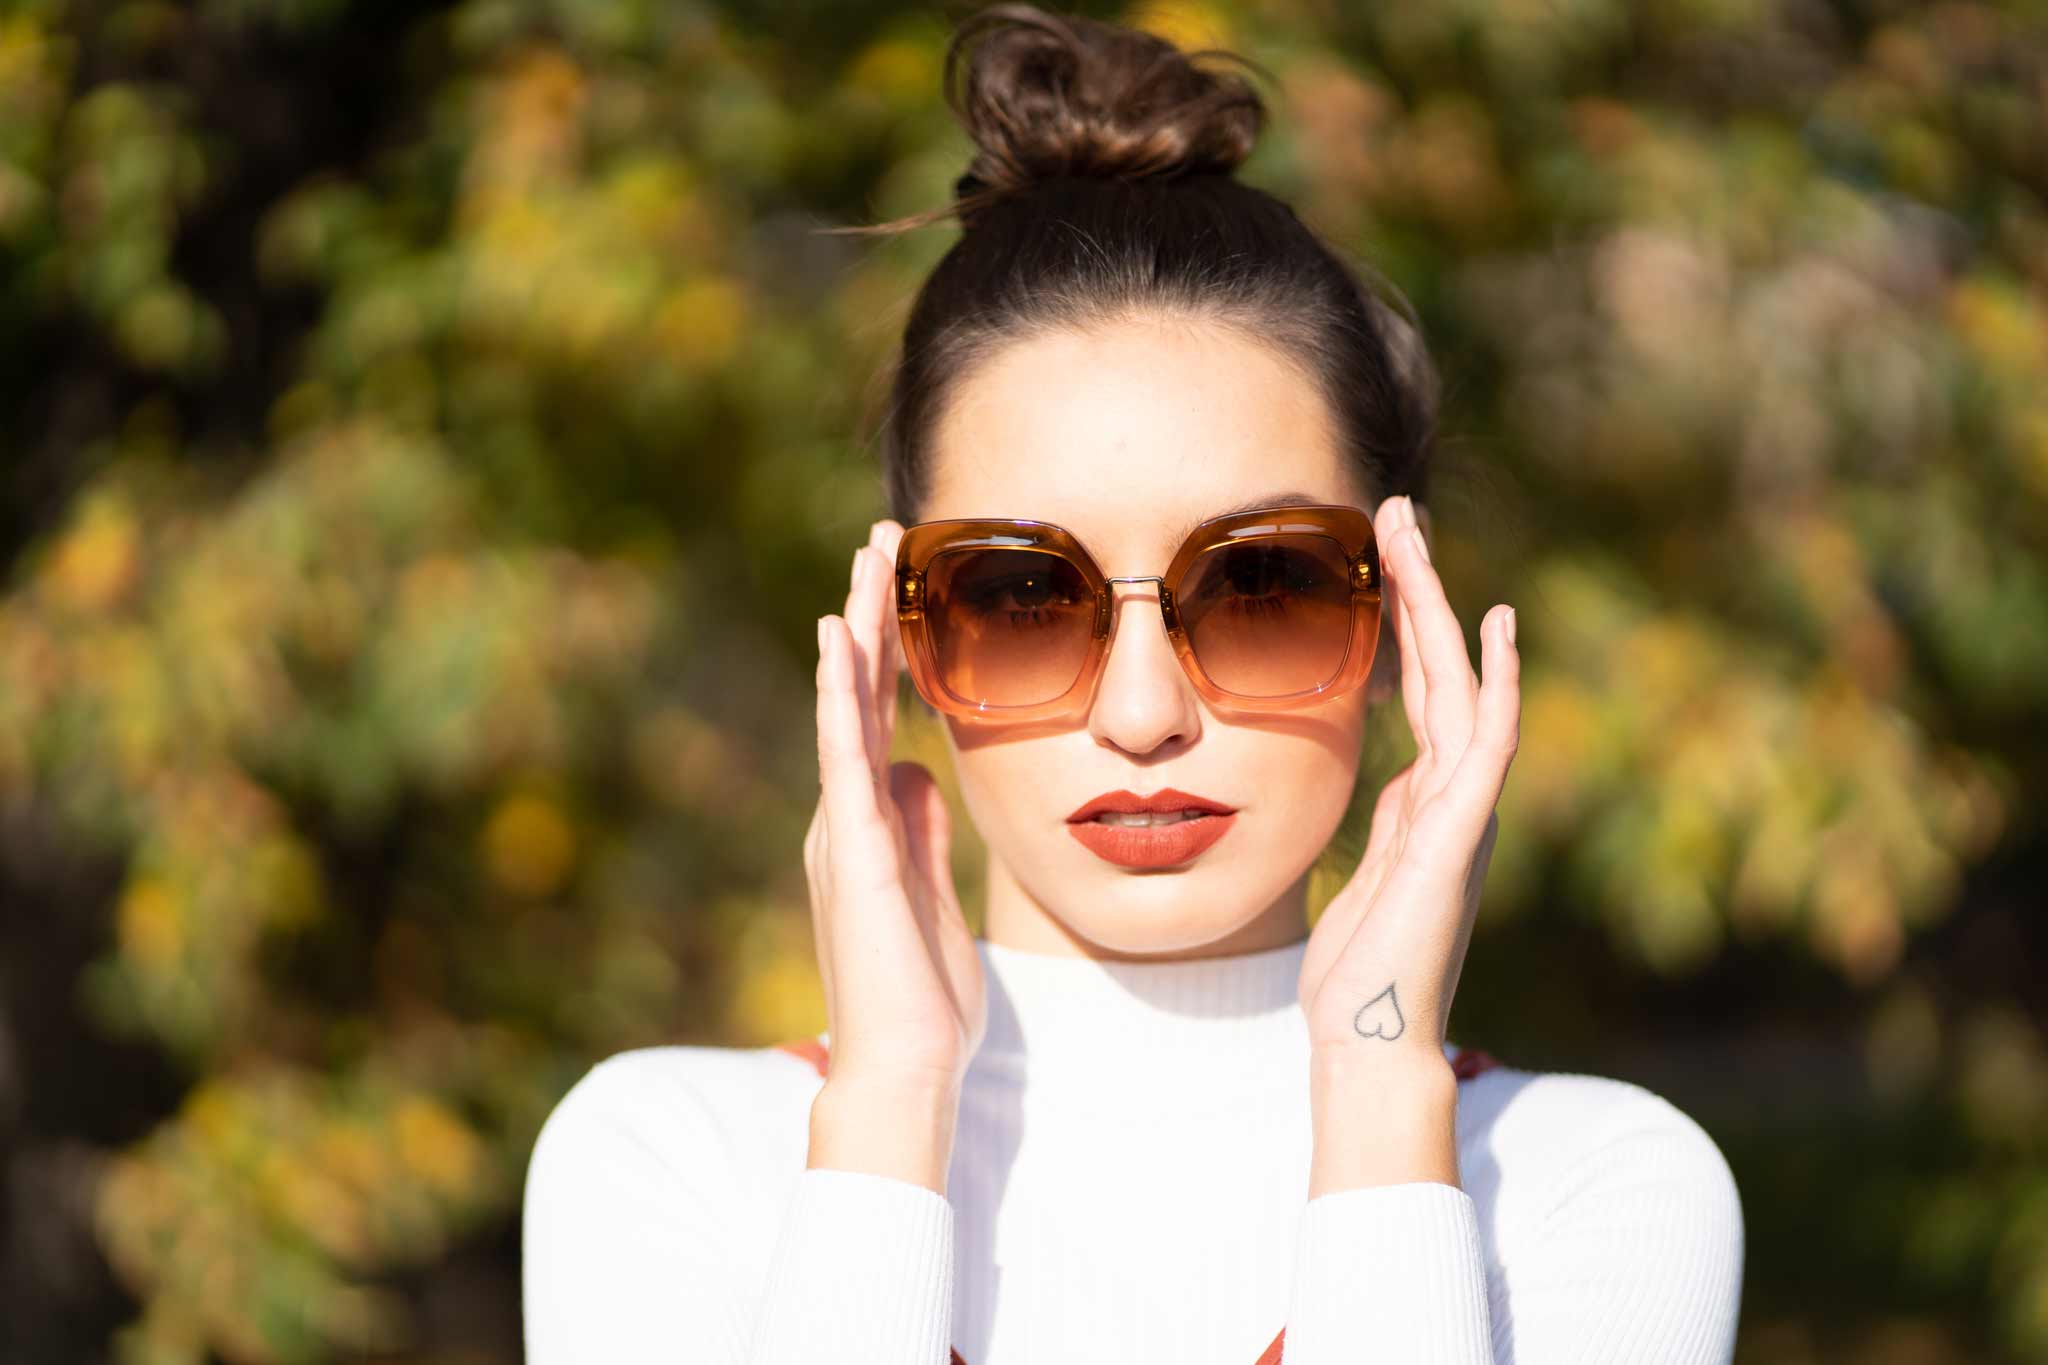 The 9 Best sunglasses trends for 2021 summer